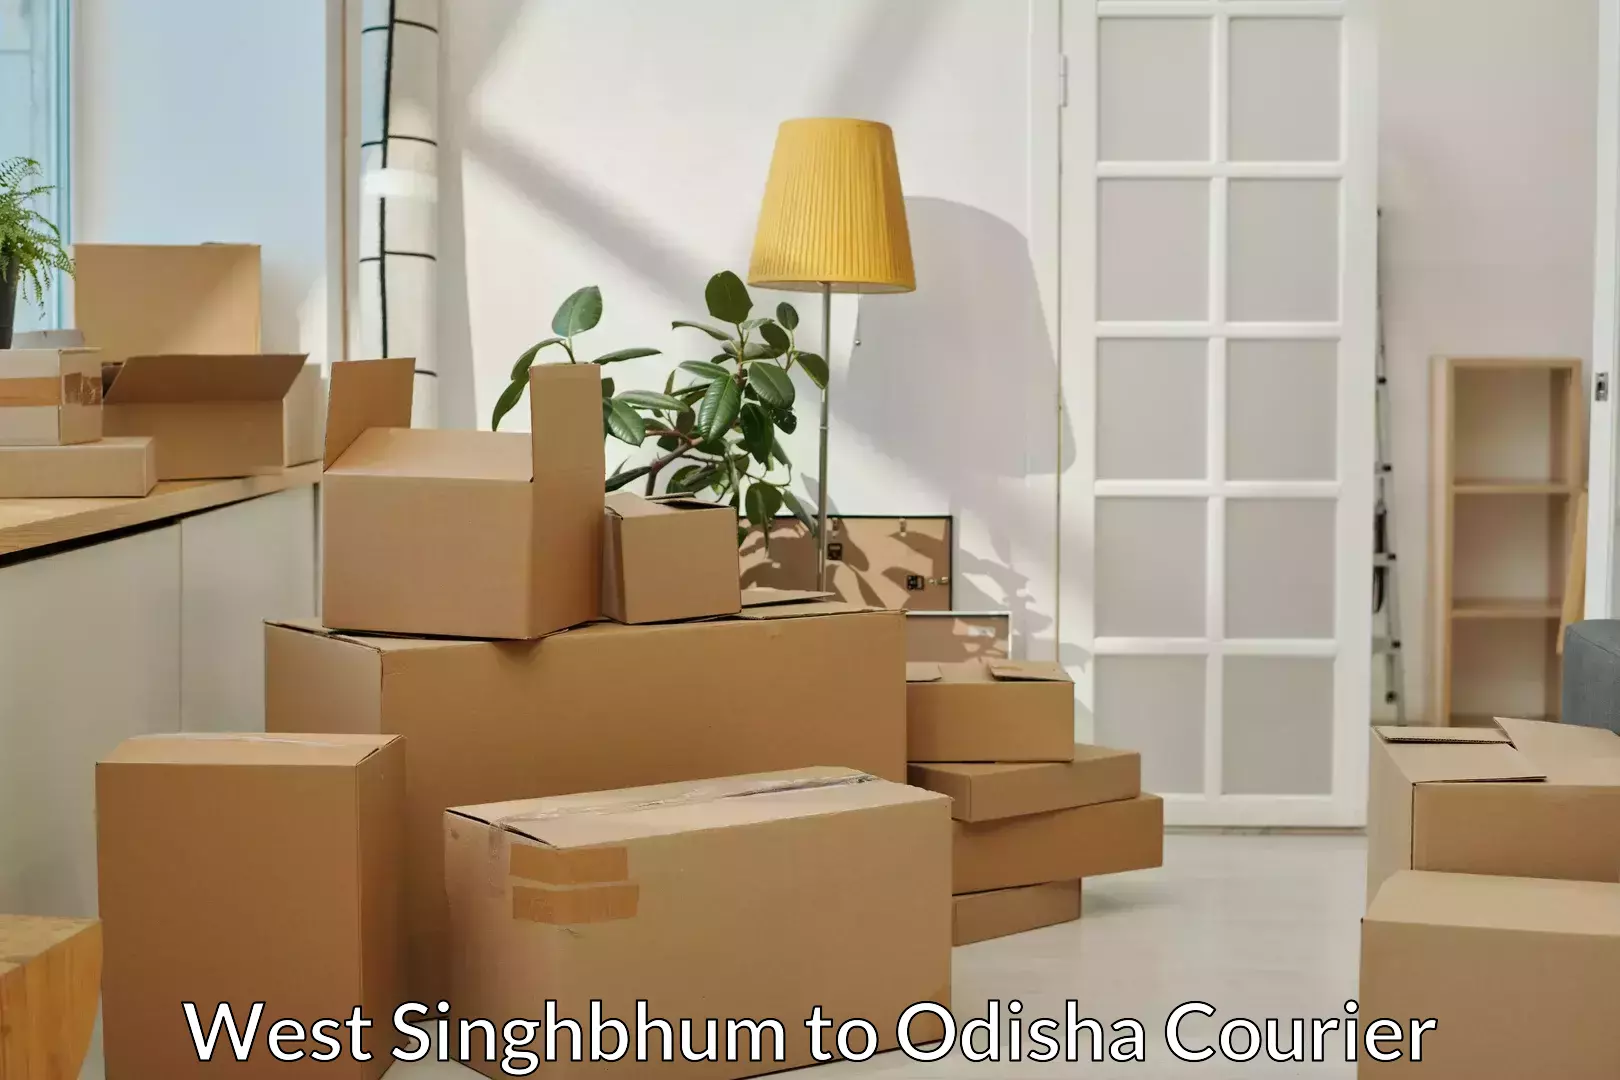 Home goods moving company in West Singhbhum to Duburi